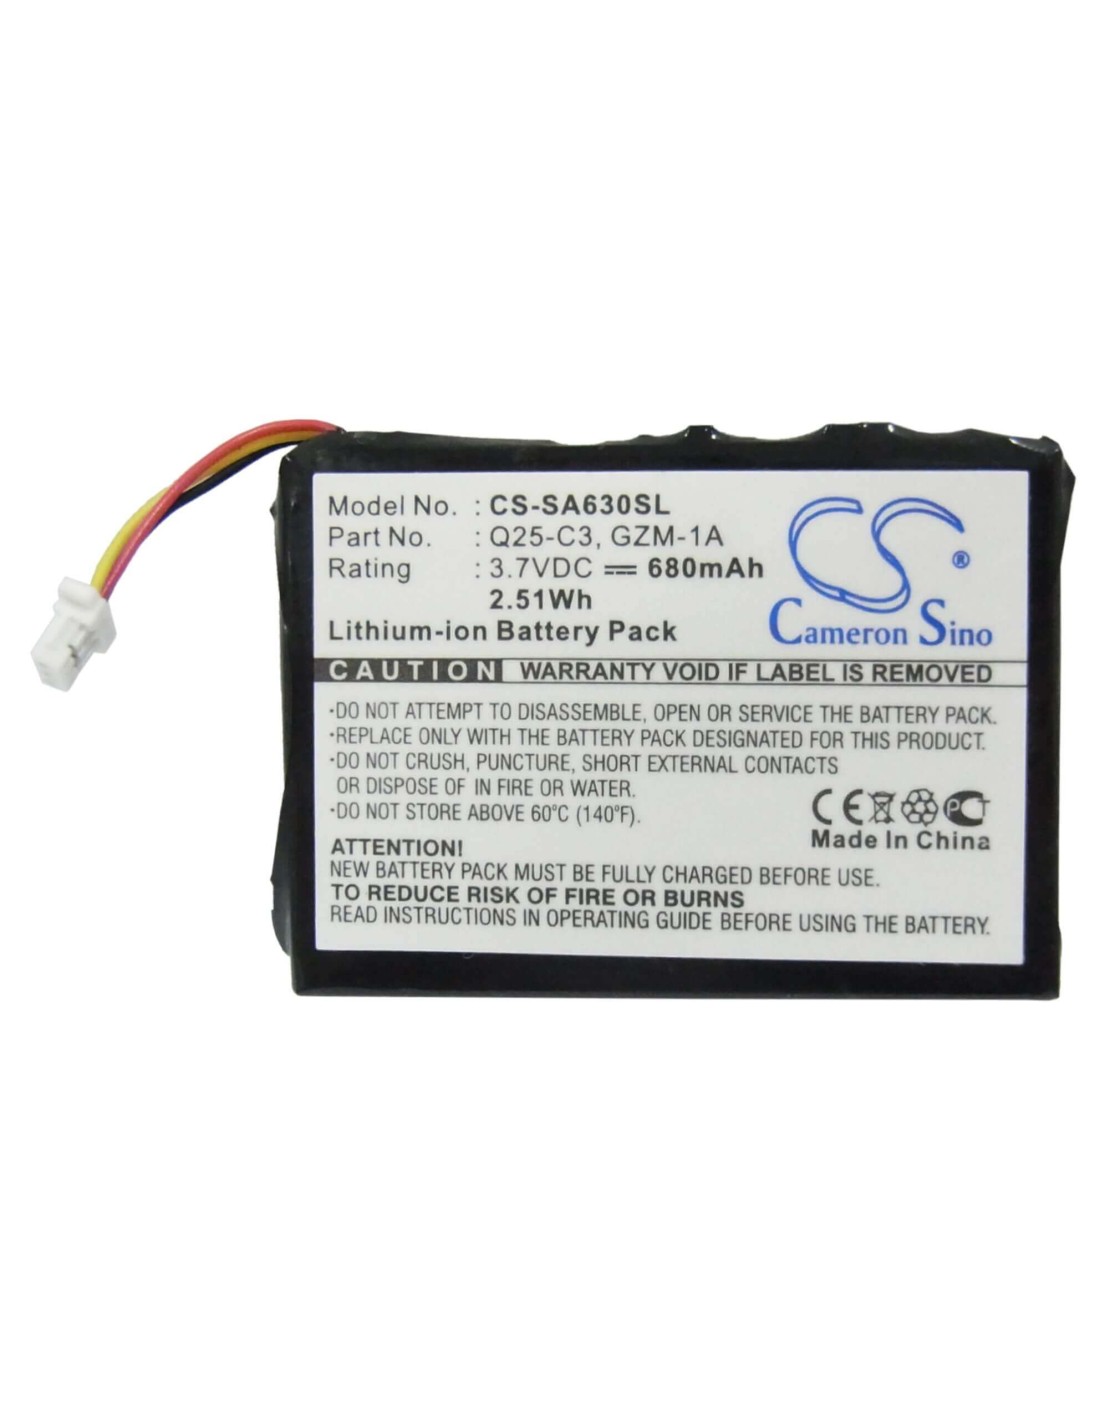 Battery for Philips Gogear Hdd6330 30gb 3.7V, 680mAh - 2.52Wh